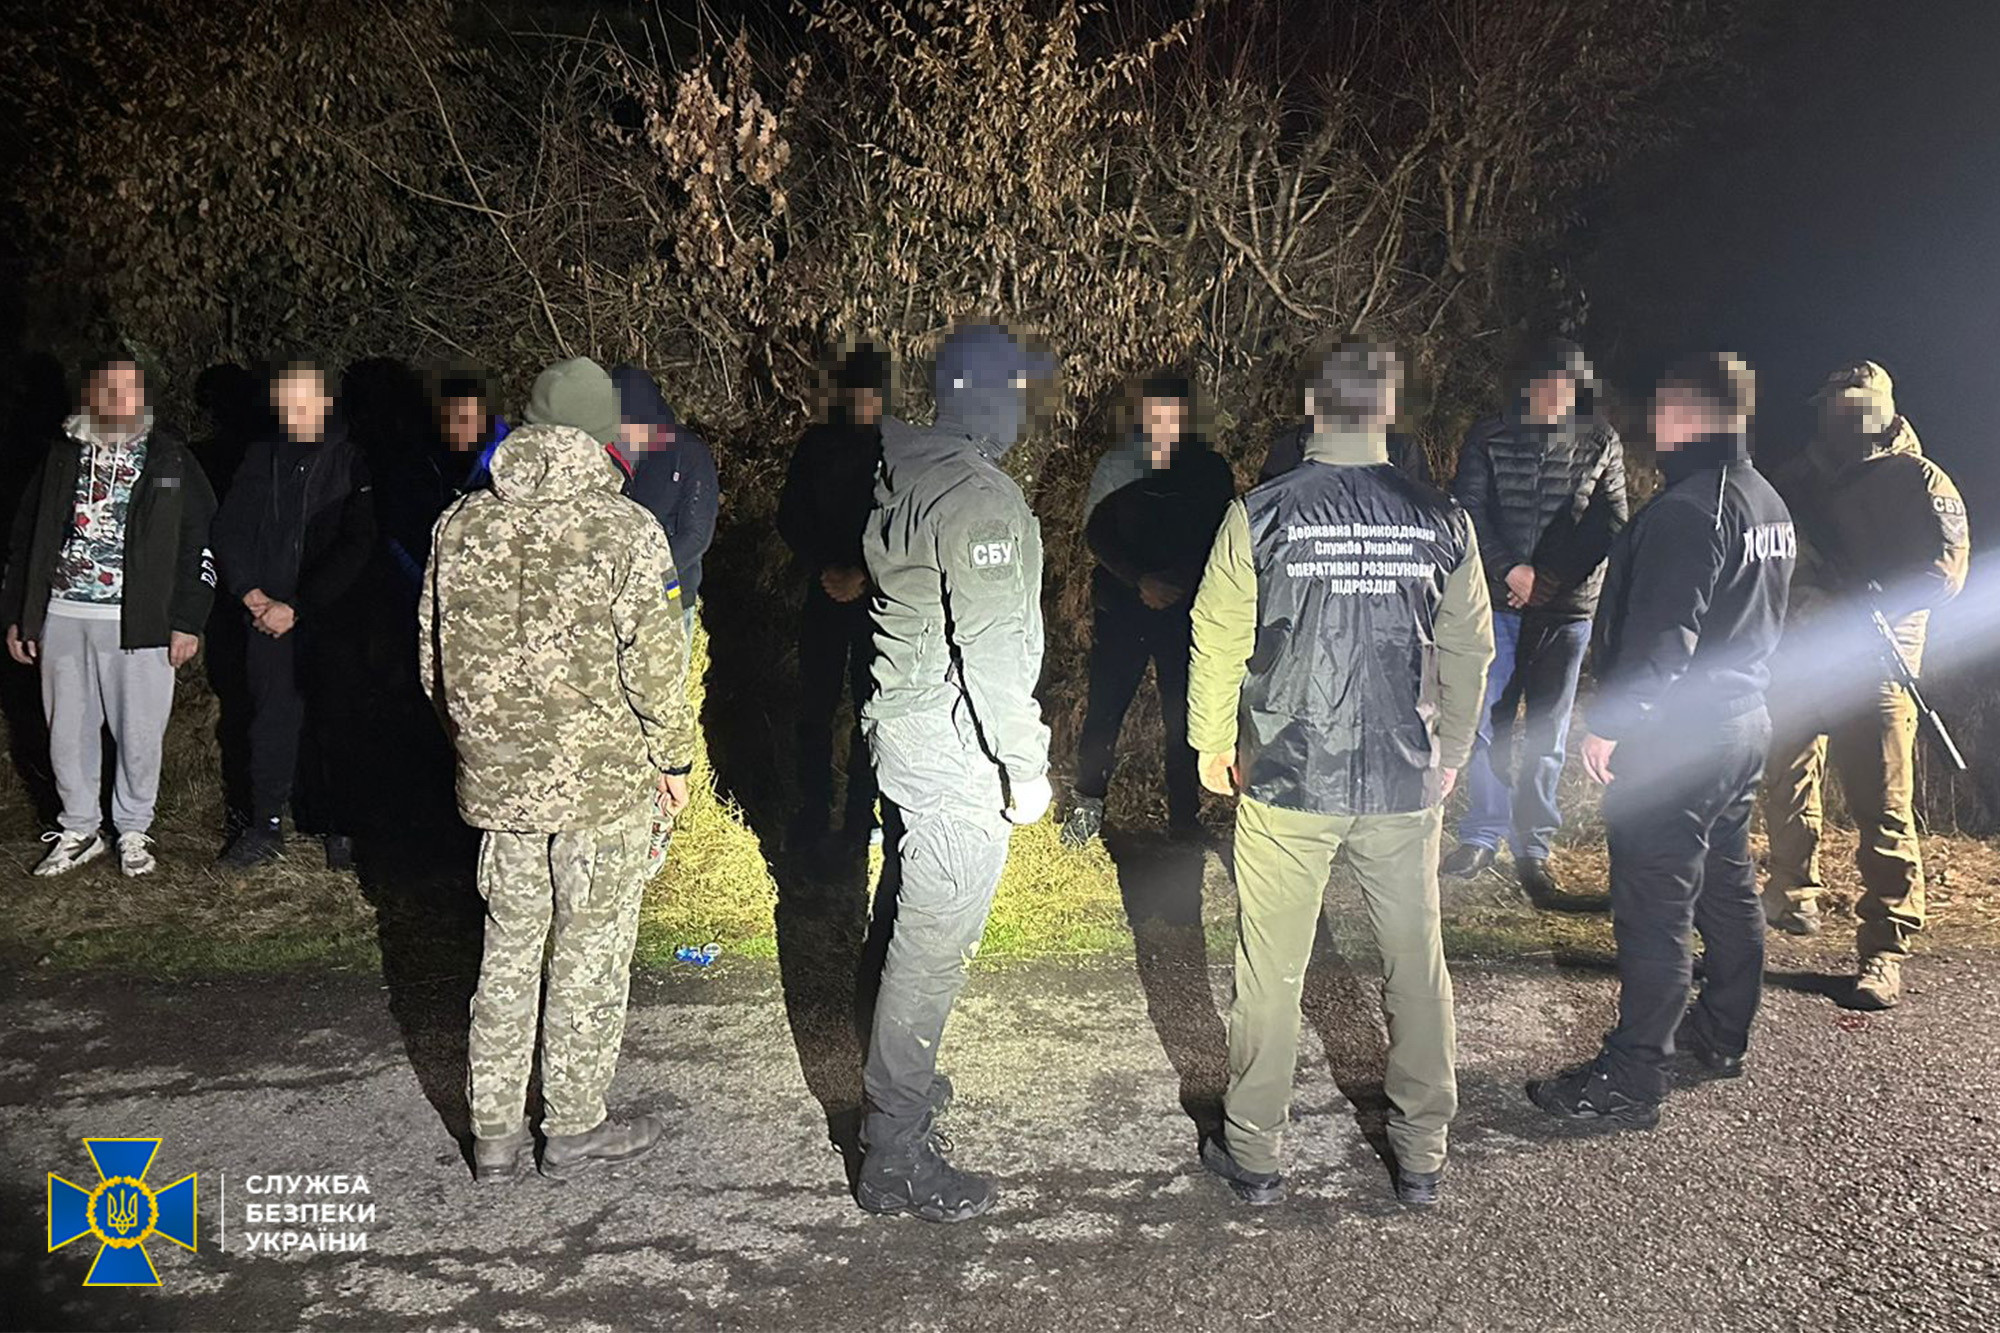 Law enforcers established that three residents of Rakhiv district were involved in the organization of the illegal 